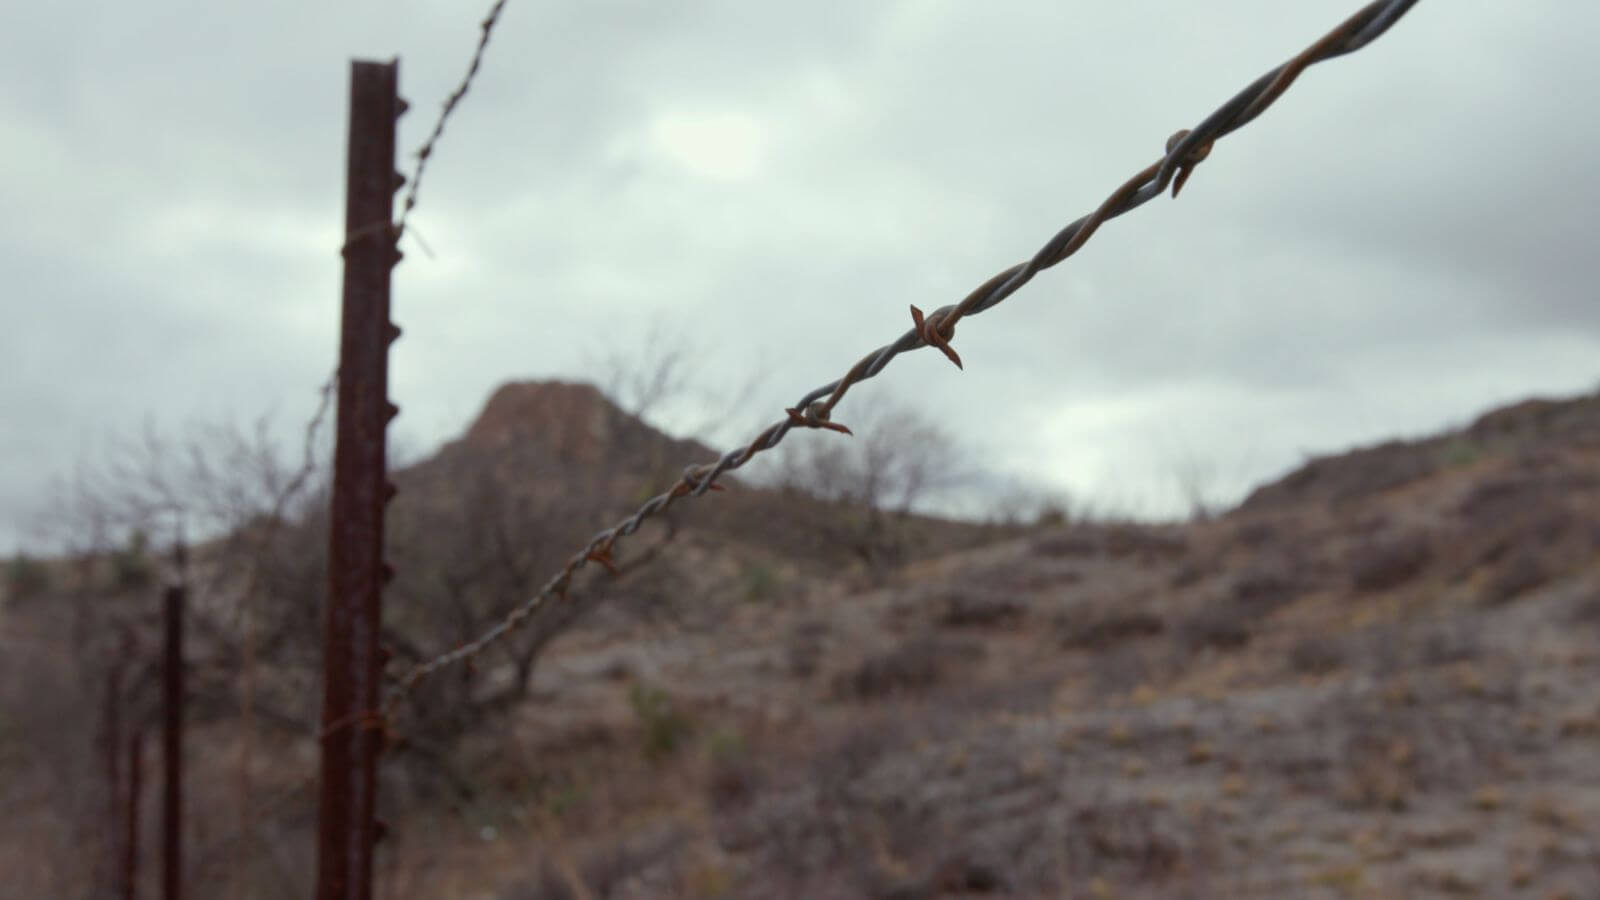 Rusty, barbed wire fence in a desert landscape